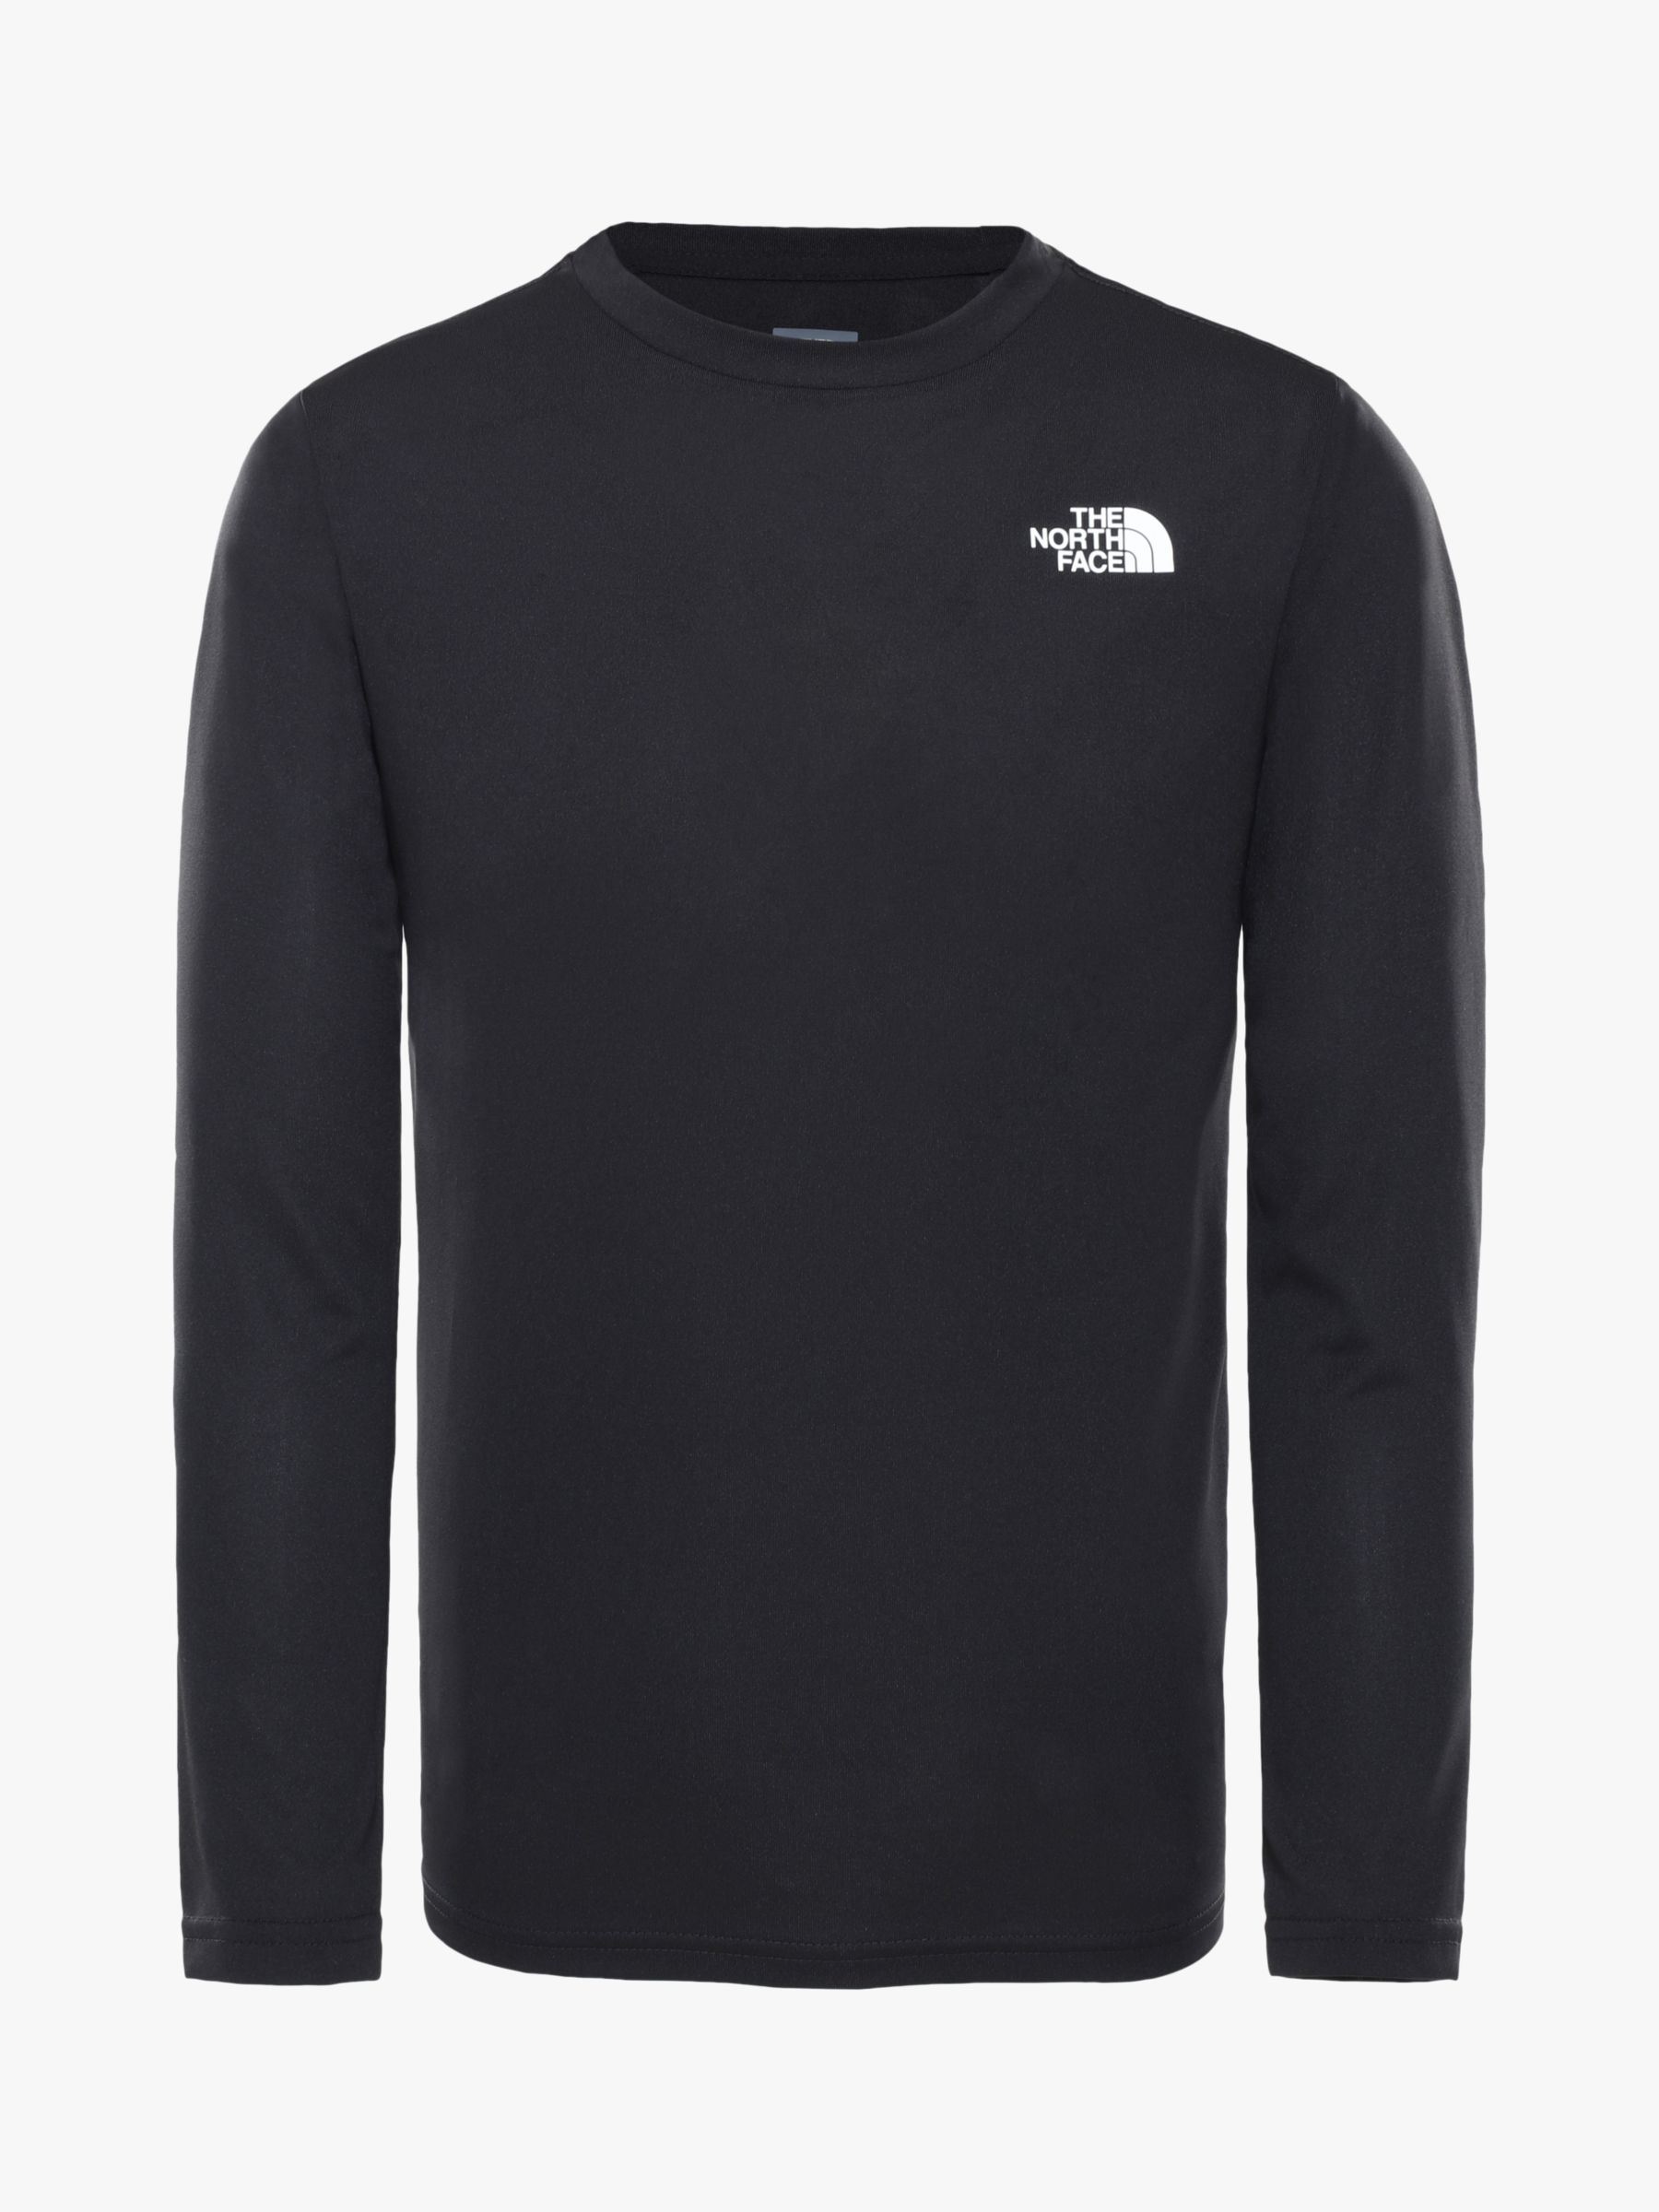 Image of The North Face Boys Reaxion Long Sleeved TShirt Black